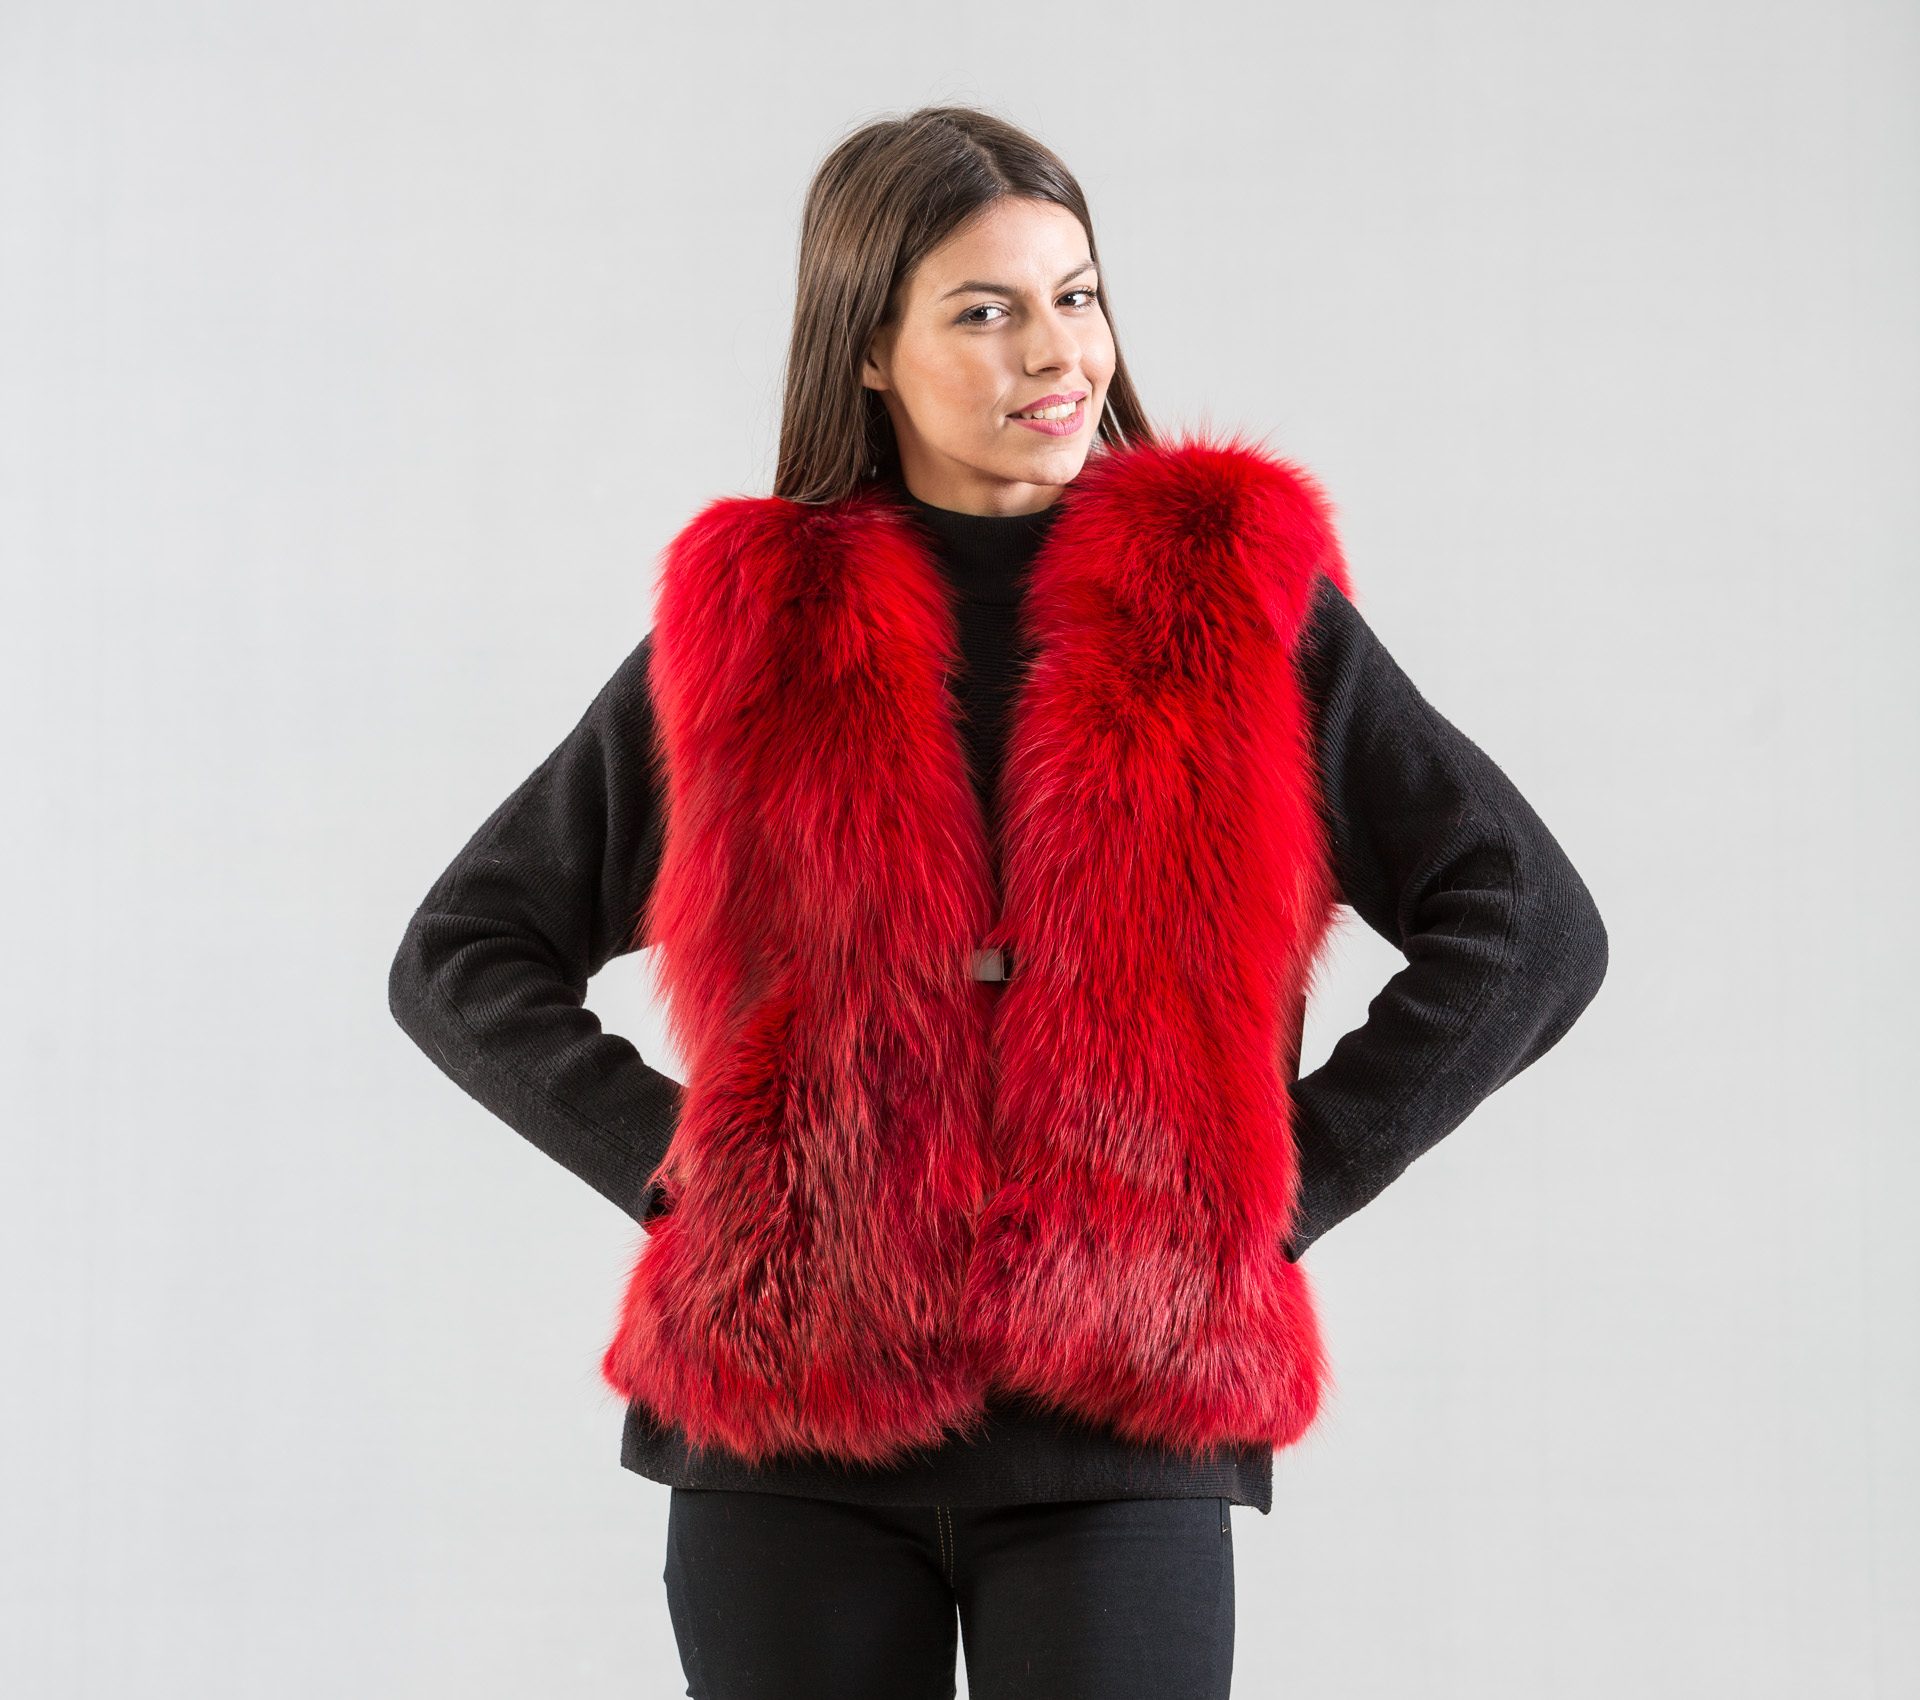 Red Fox Fur Vest. 100% Real Fur Coats and Accessories.